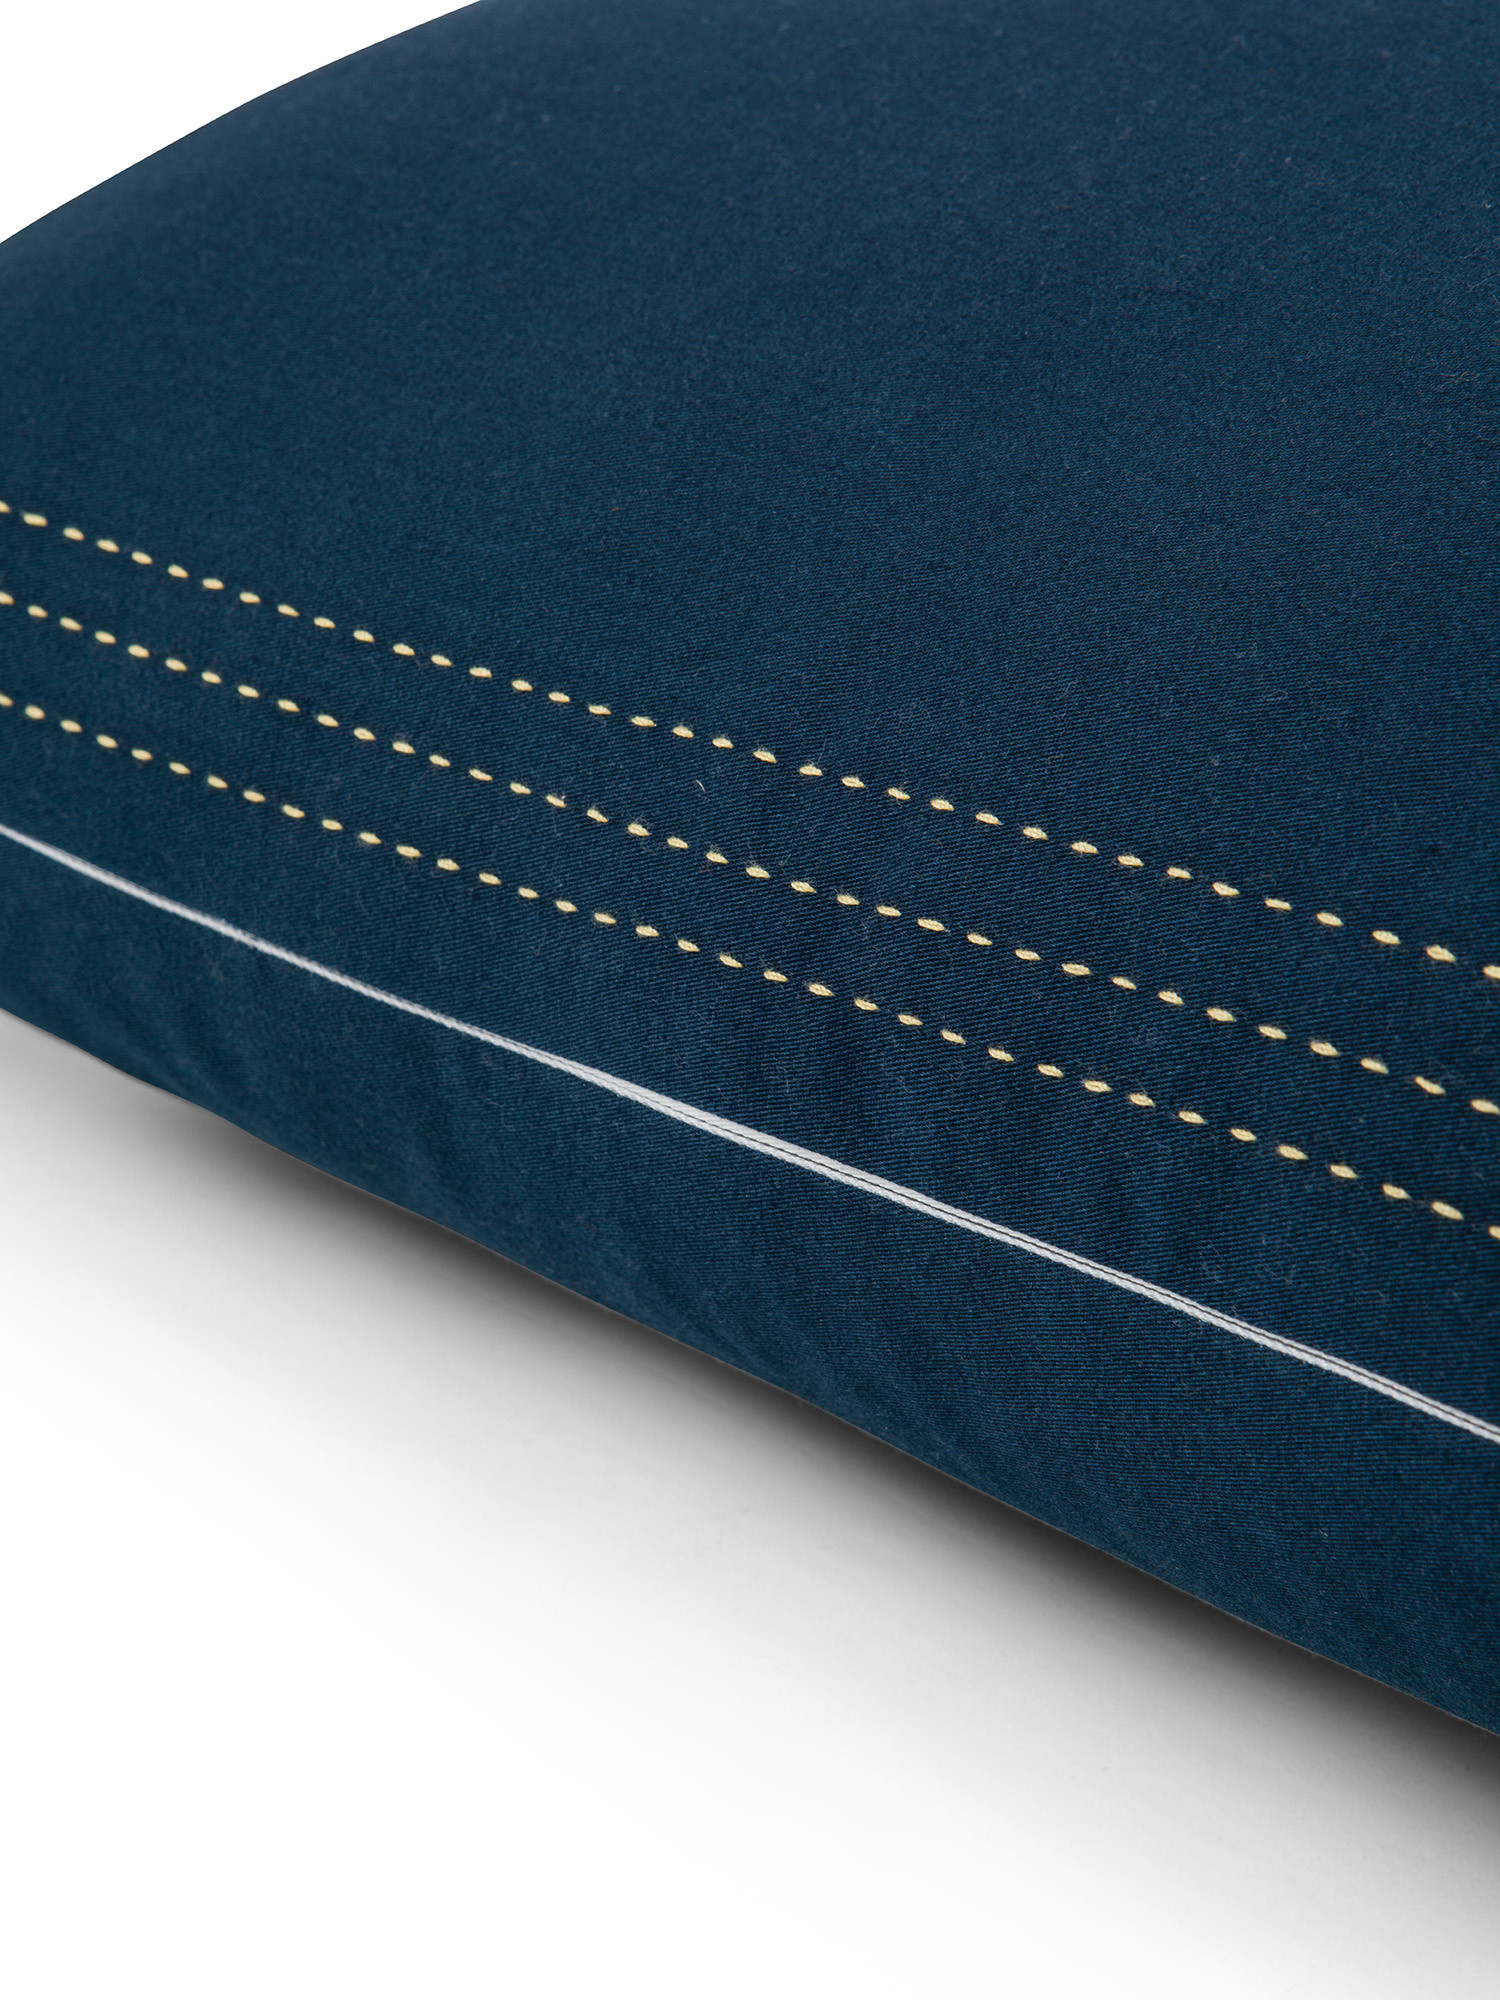 Cotton twill cushion with stitching 45x45cm, Dark Blue, large image number 2